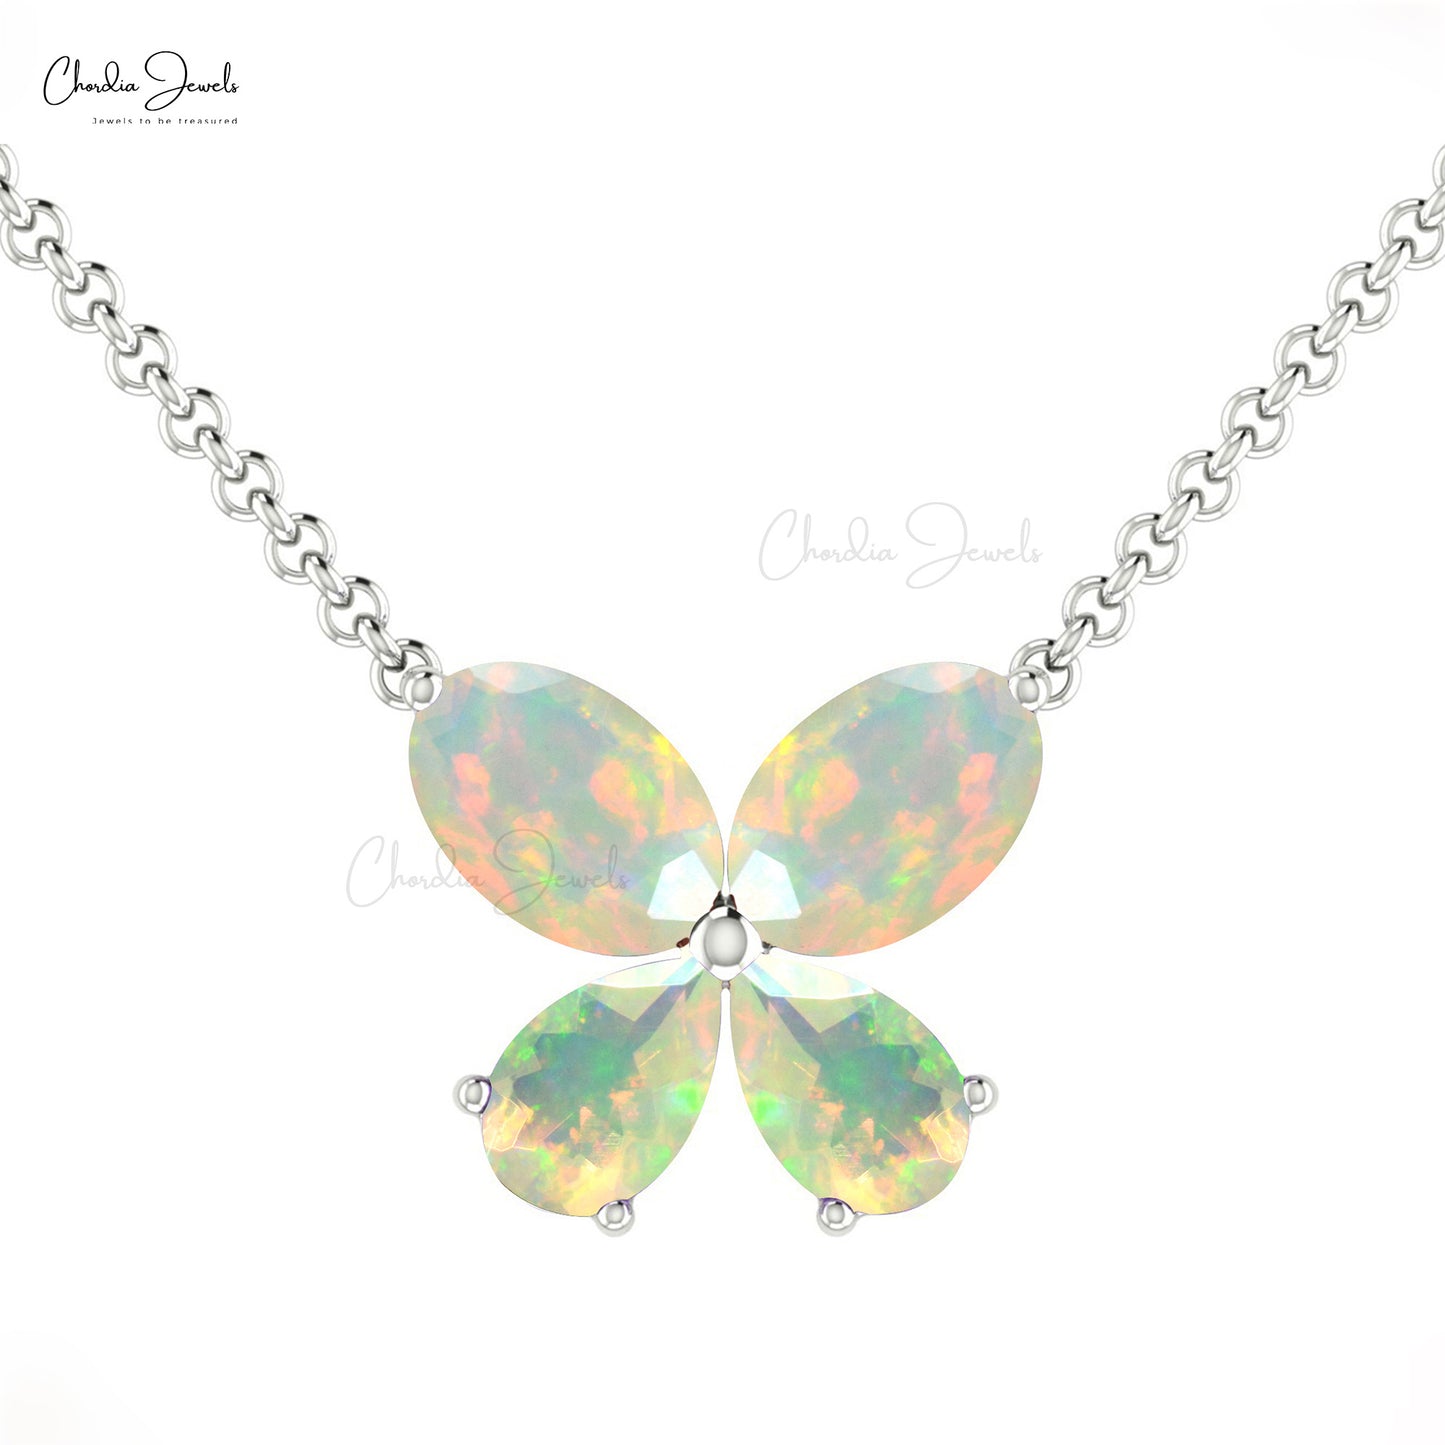 Exquisite Genuine Fire Opal Butterfly Necklace Pendant 14k Real Gold Charms Necklace Oval Shape Gemstone Jewelry For Engagement Gift